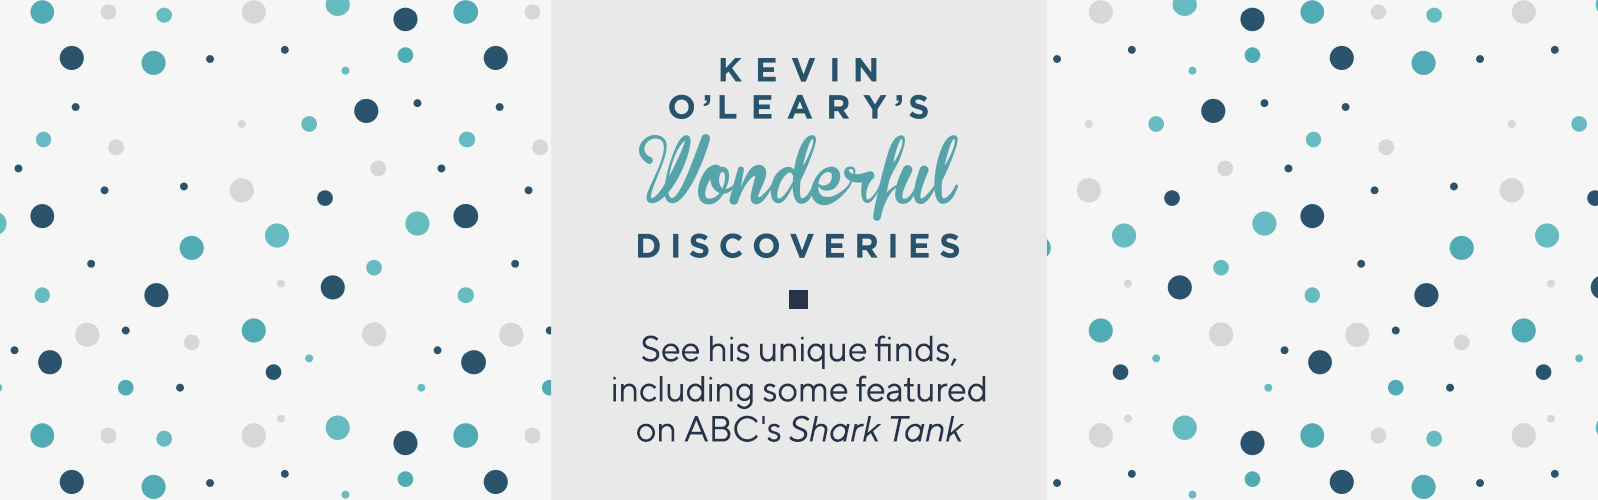 Kevin O'Leary's Wonderful Discoveries.  See his unique finds, including some featured on ABC's Shark Tank